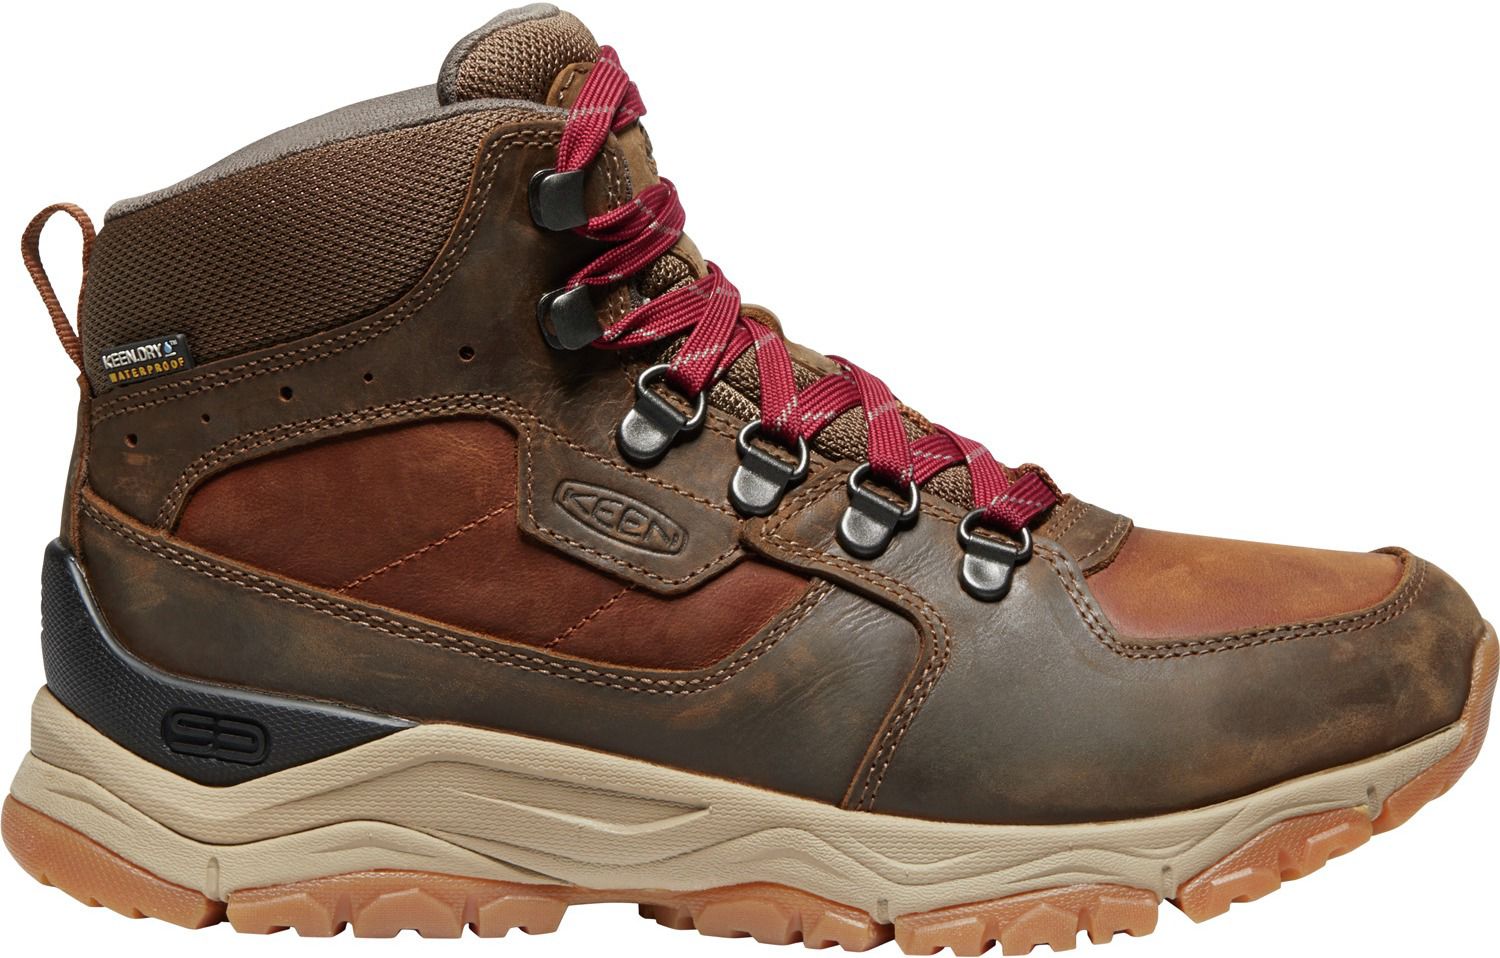 women's mid hiking boots